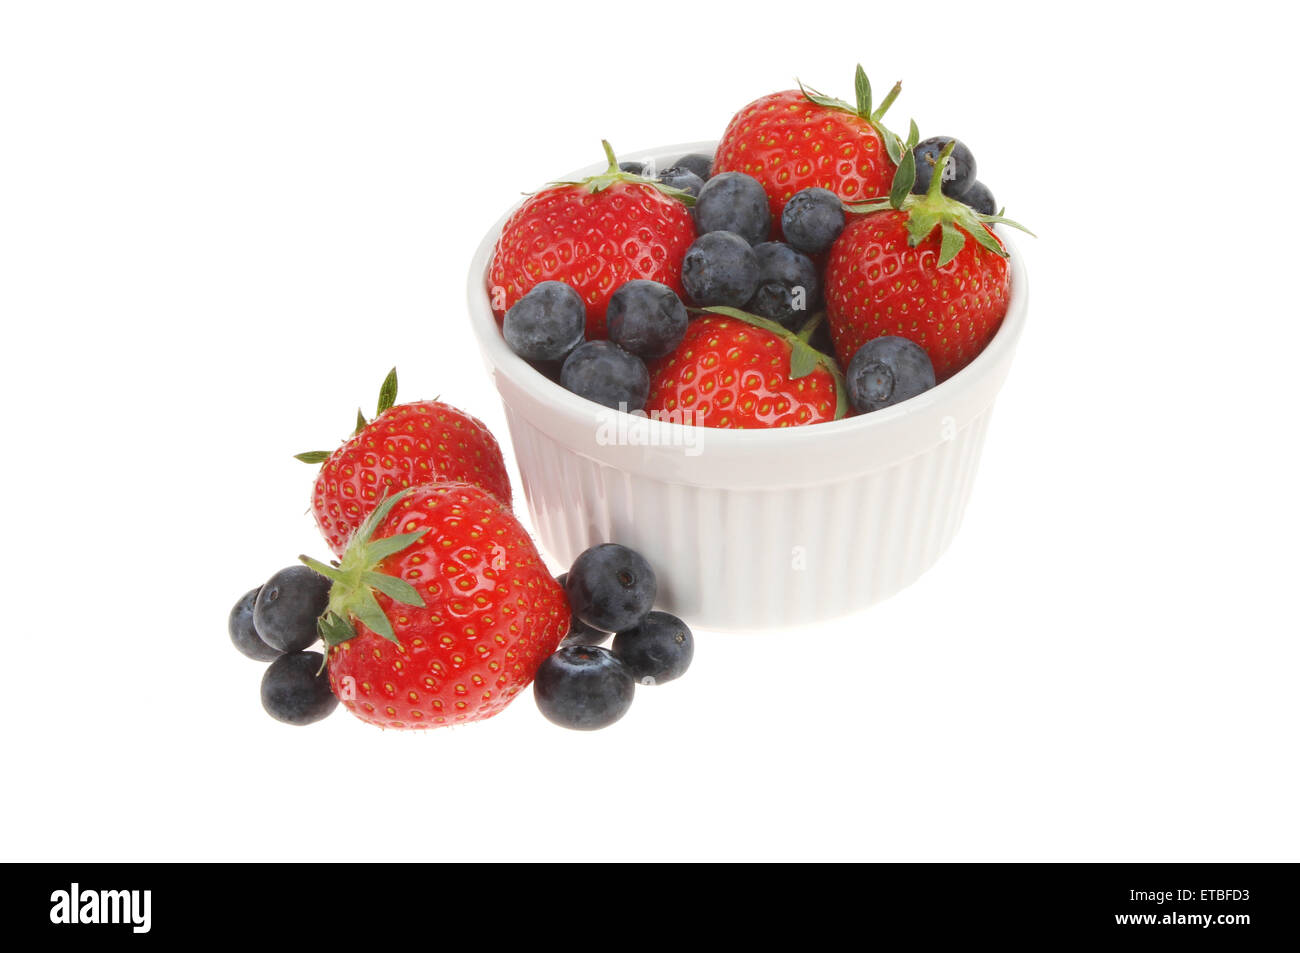 Strawberries and blueberries in and around a ramekin isolated against white Stock Photo